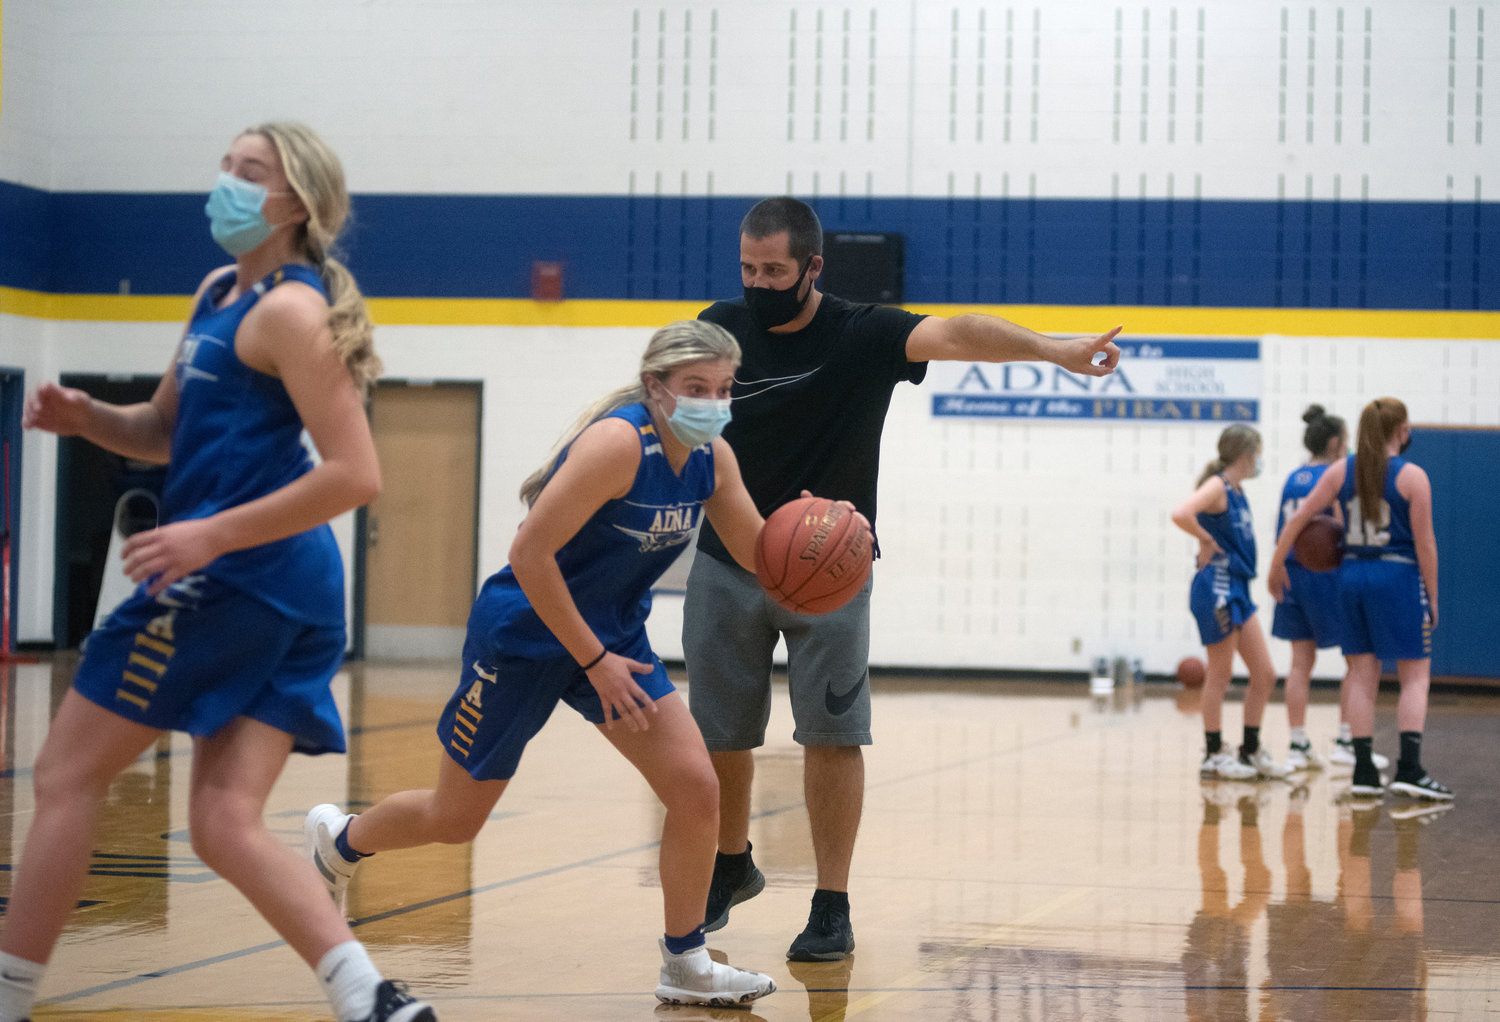 Adna junior Kaylin Todd drives with the ball during practice Monday night.